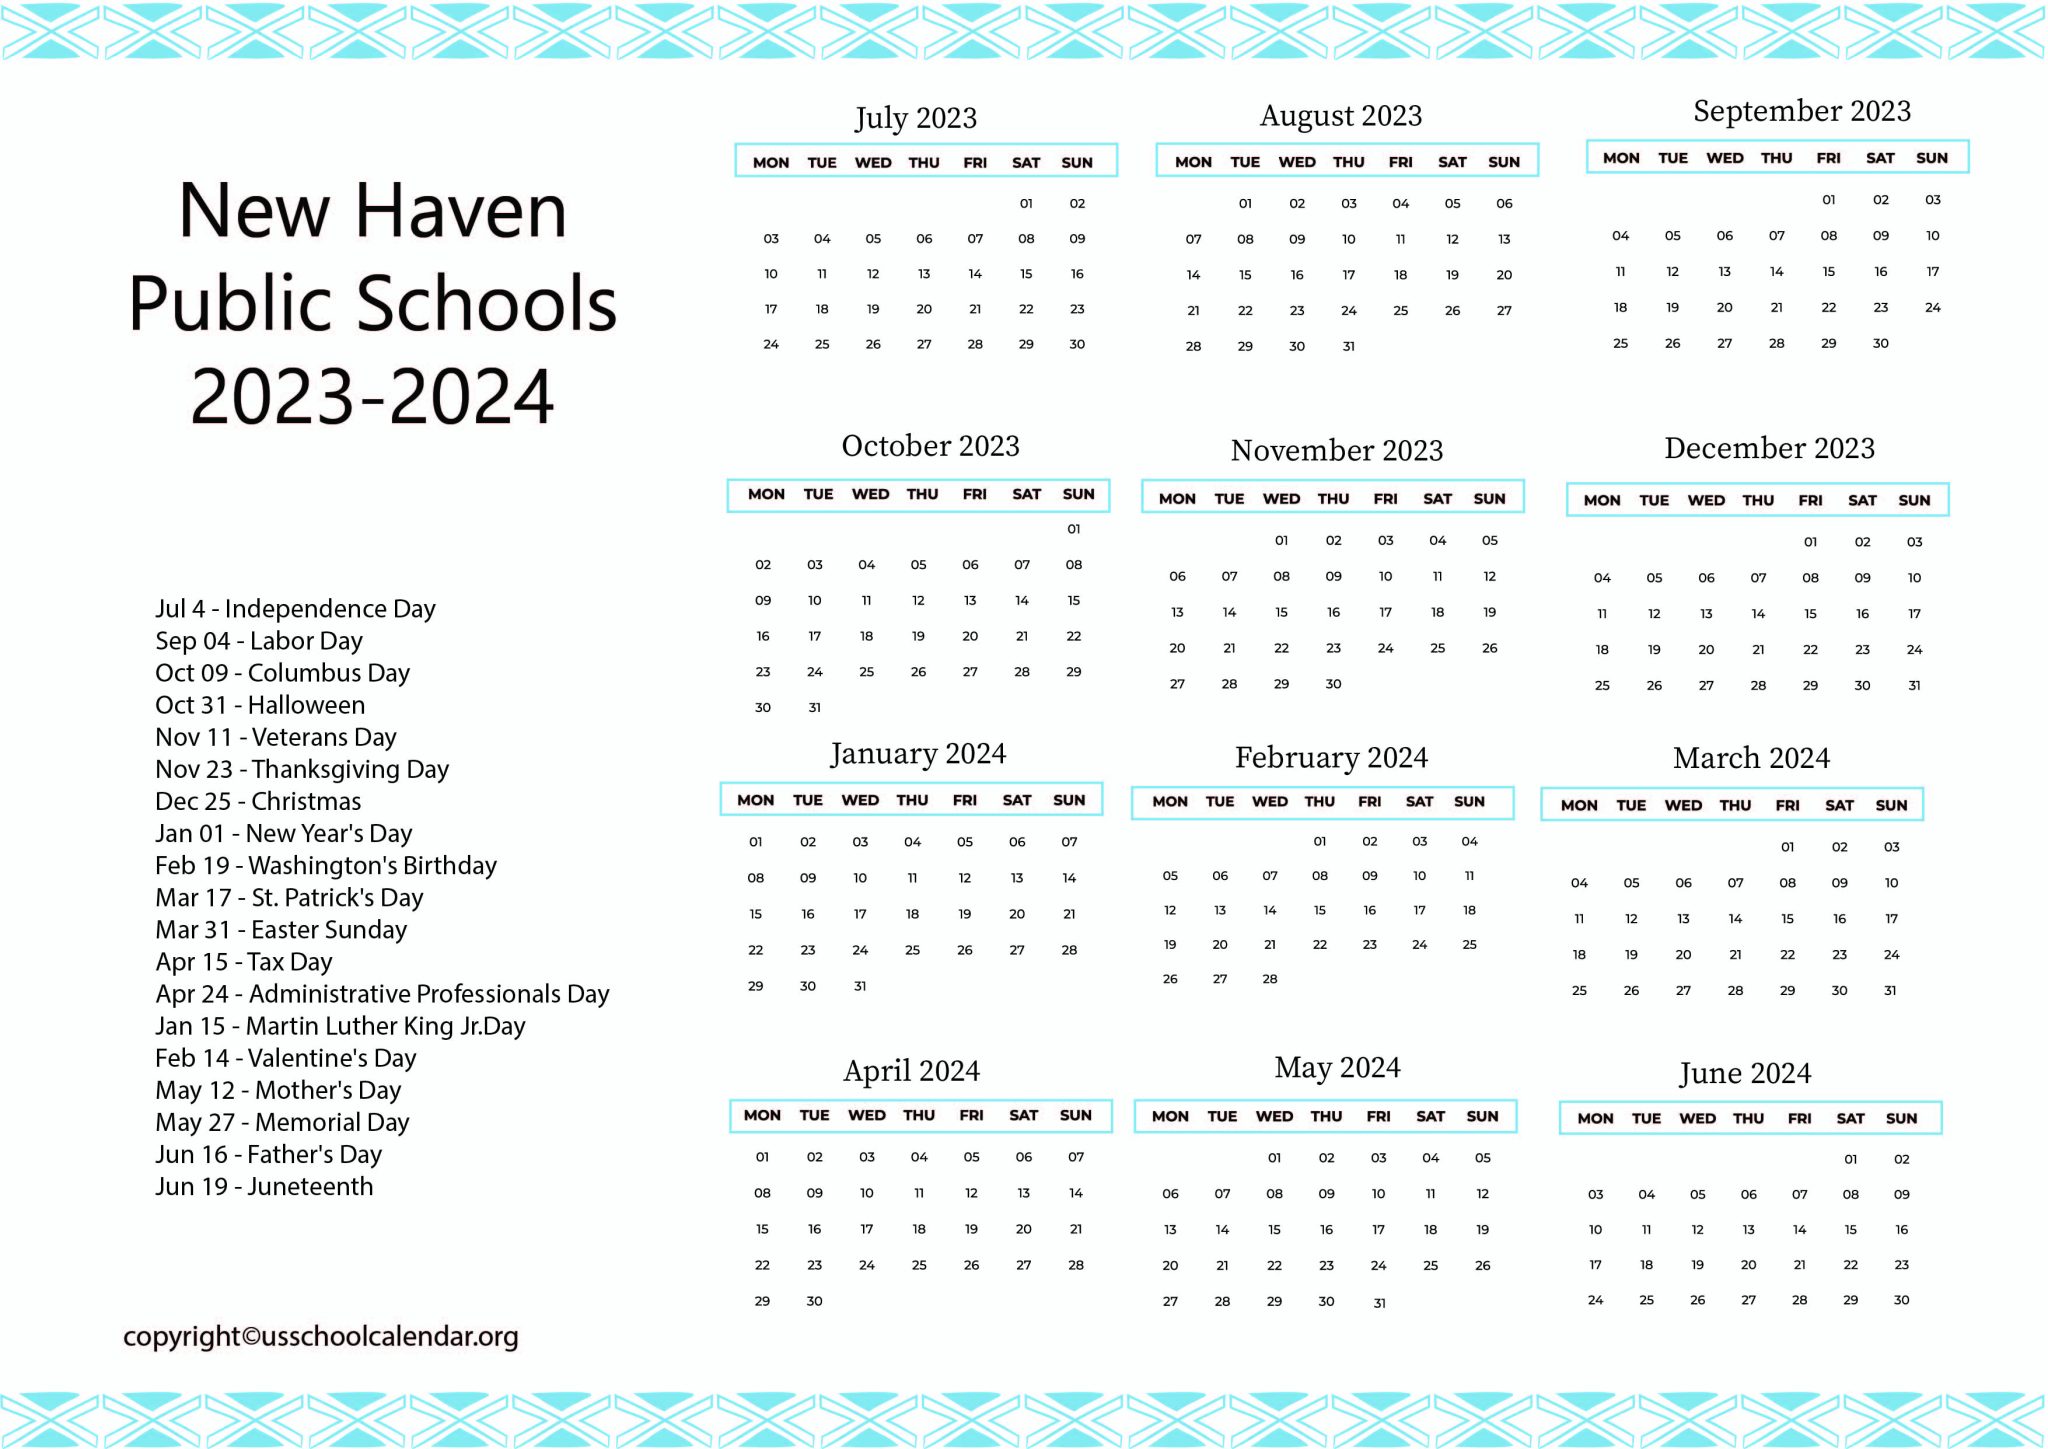 new-haven-public-schools-calendar-with-holidays-2023-2024